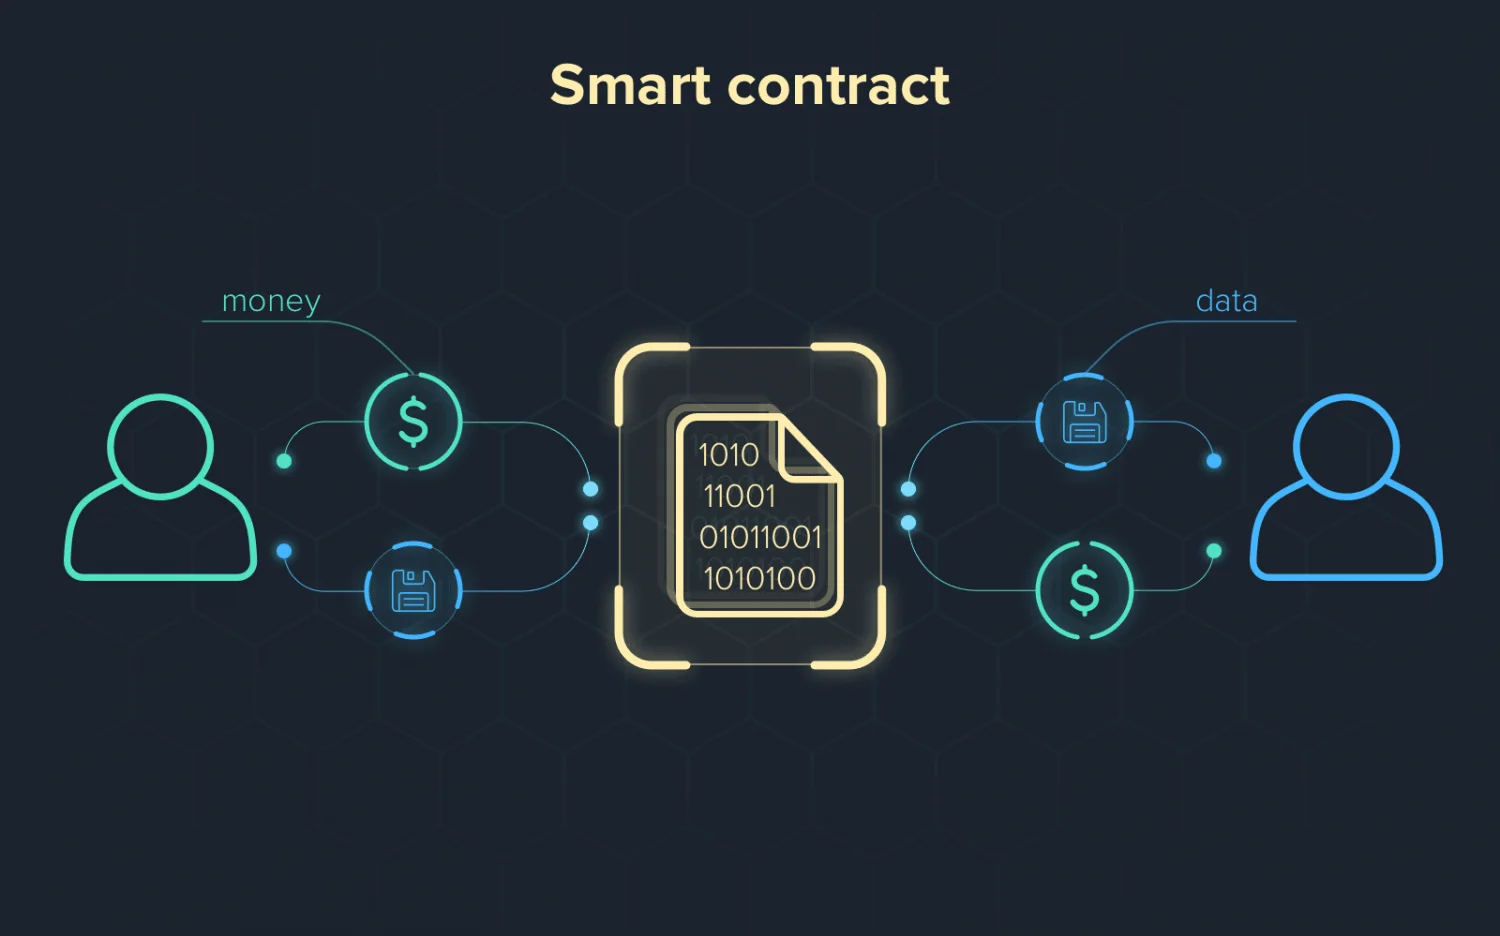 Qualifications of the best smart contract developer